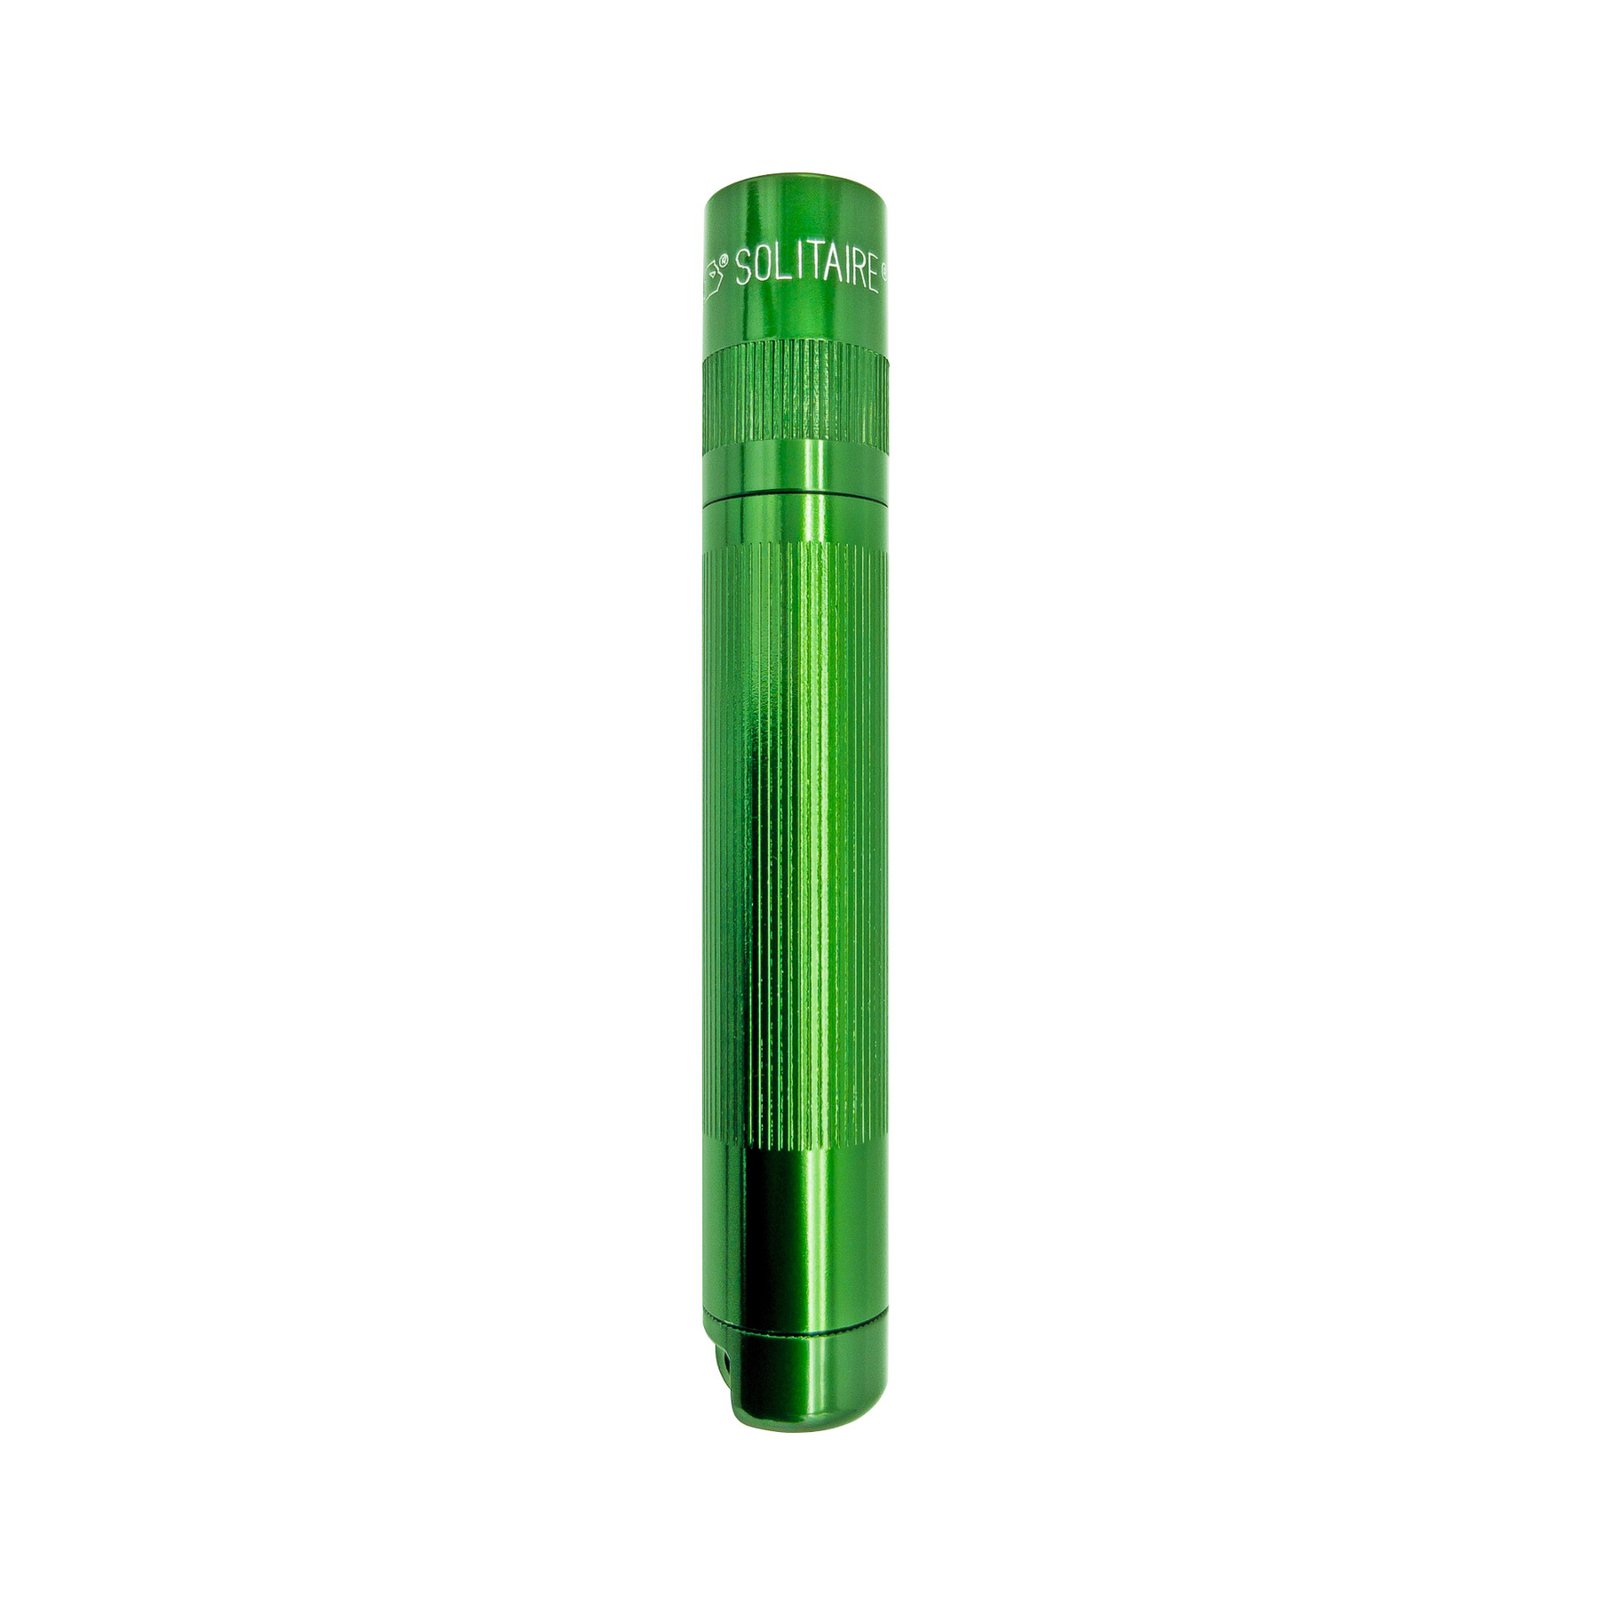 Maglite LED zaklamp Solitaire, 1 Cell AAA, groen